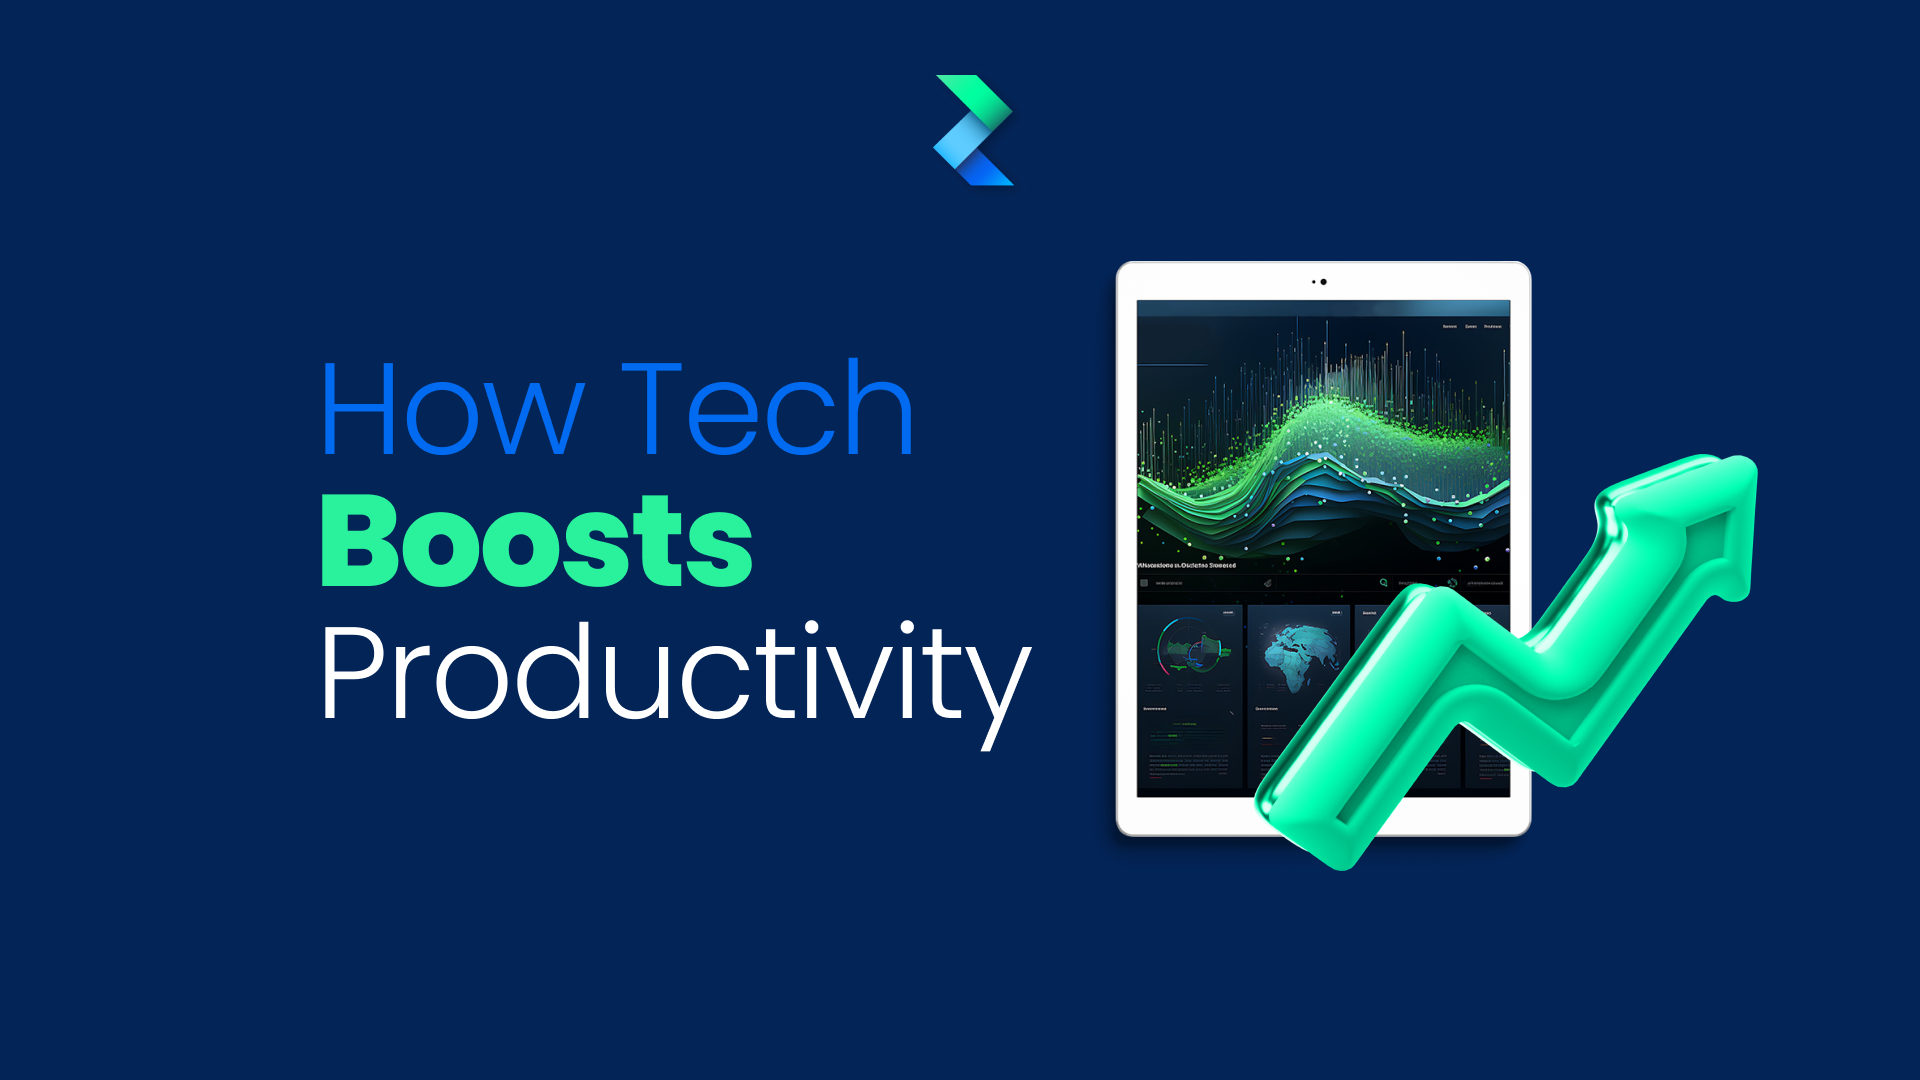 How Tech Boosts Productivity